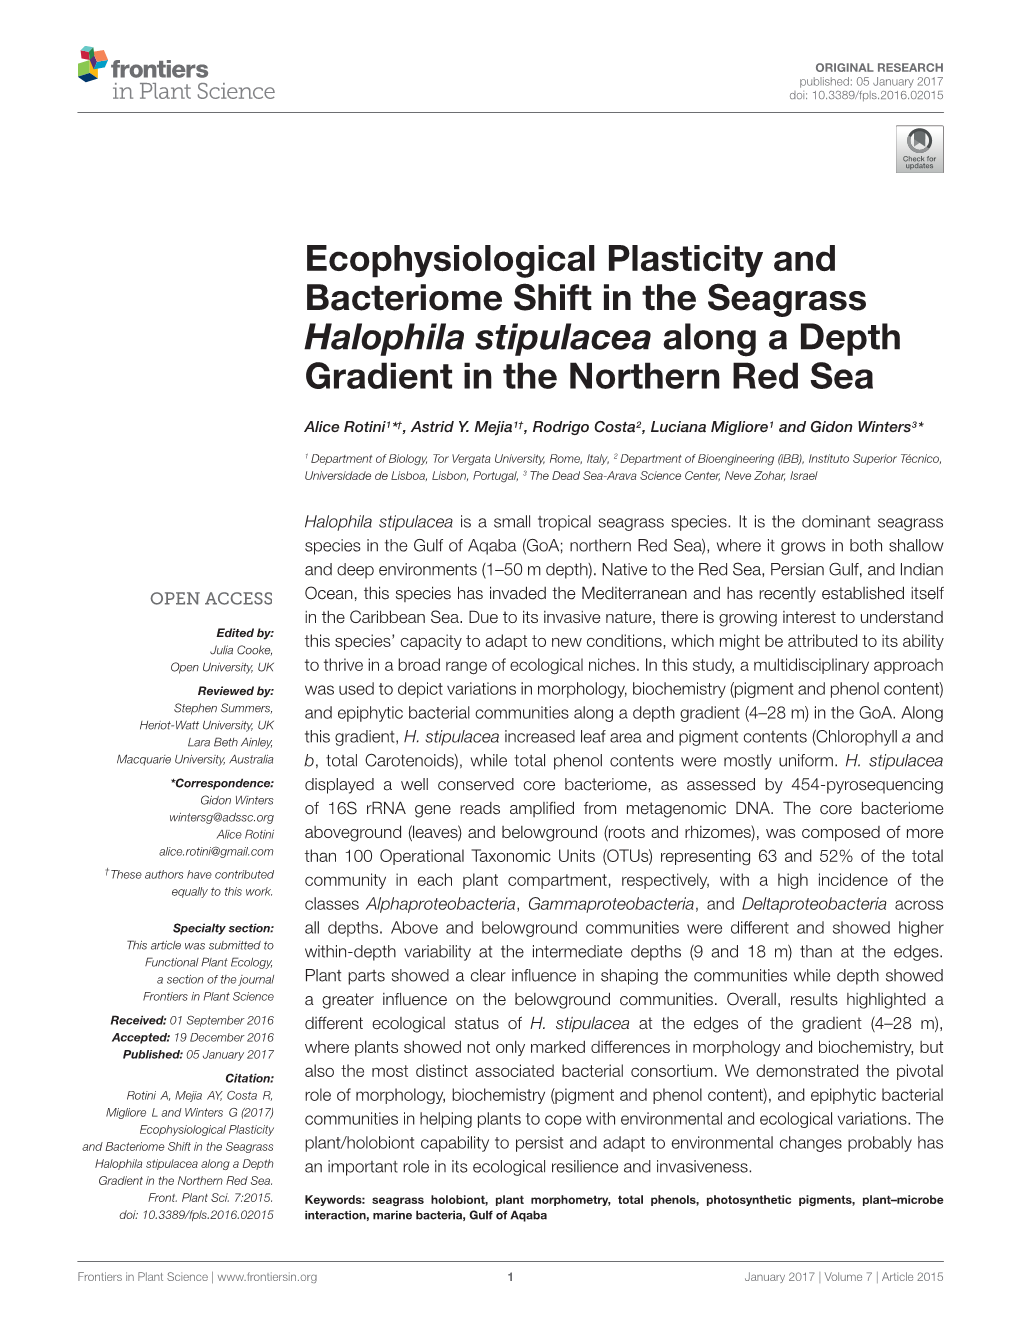 Ecophysiological Plasticity and Bacteriome Shift in the Seagrass Halophila Stipulacea Along a Depth Gradient in the Northern Red Sea